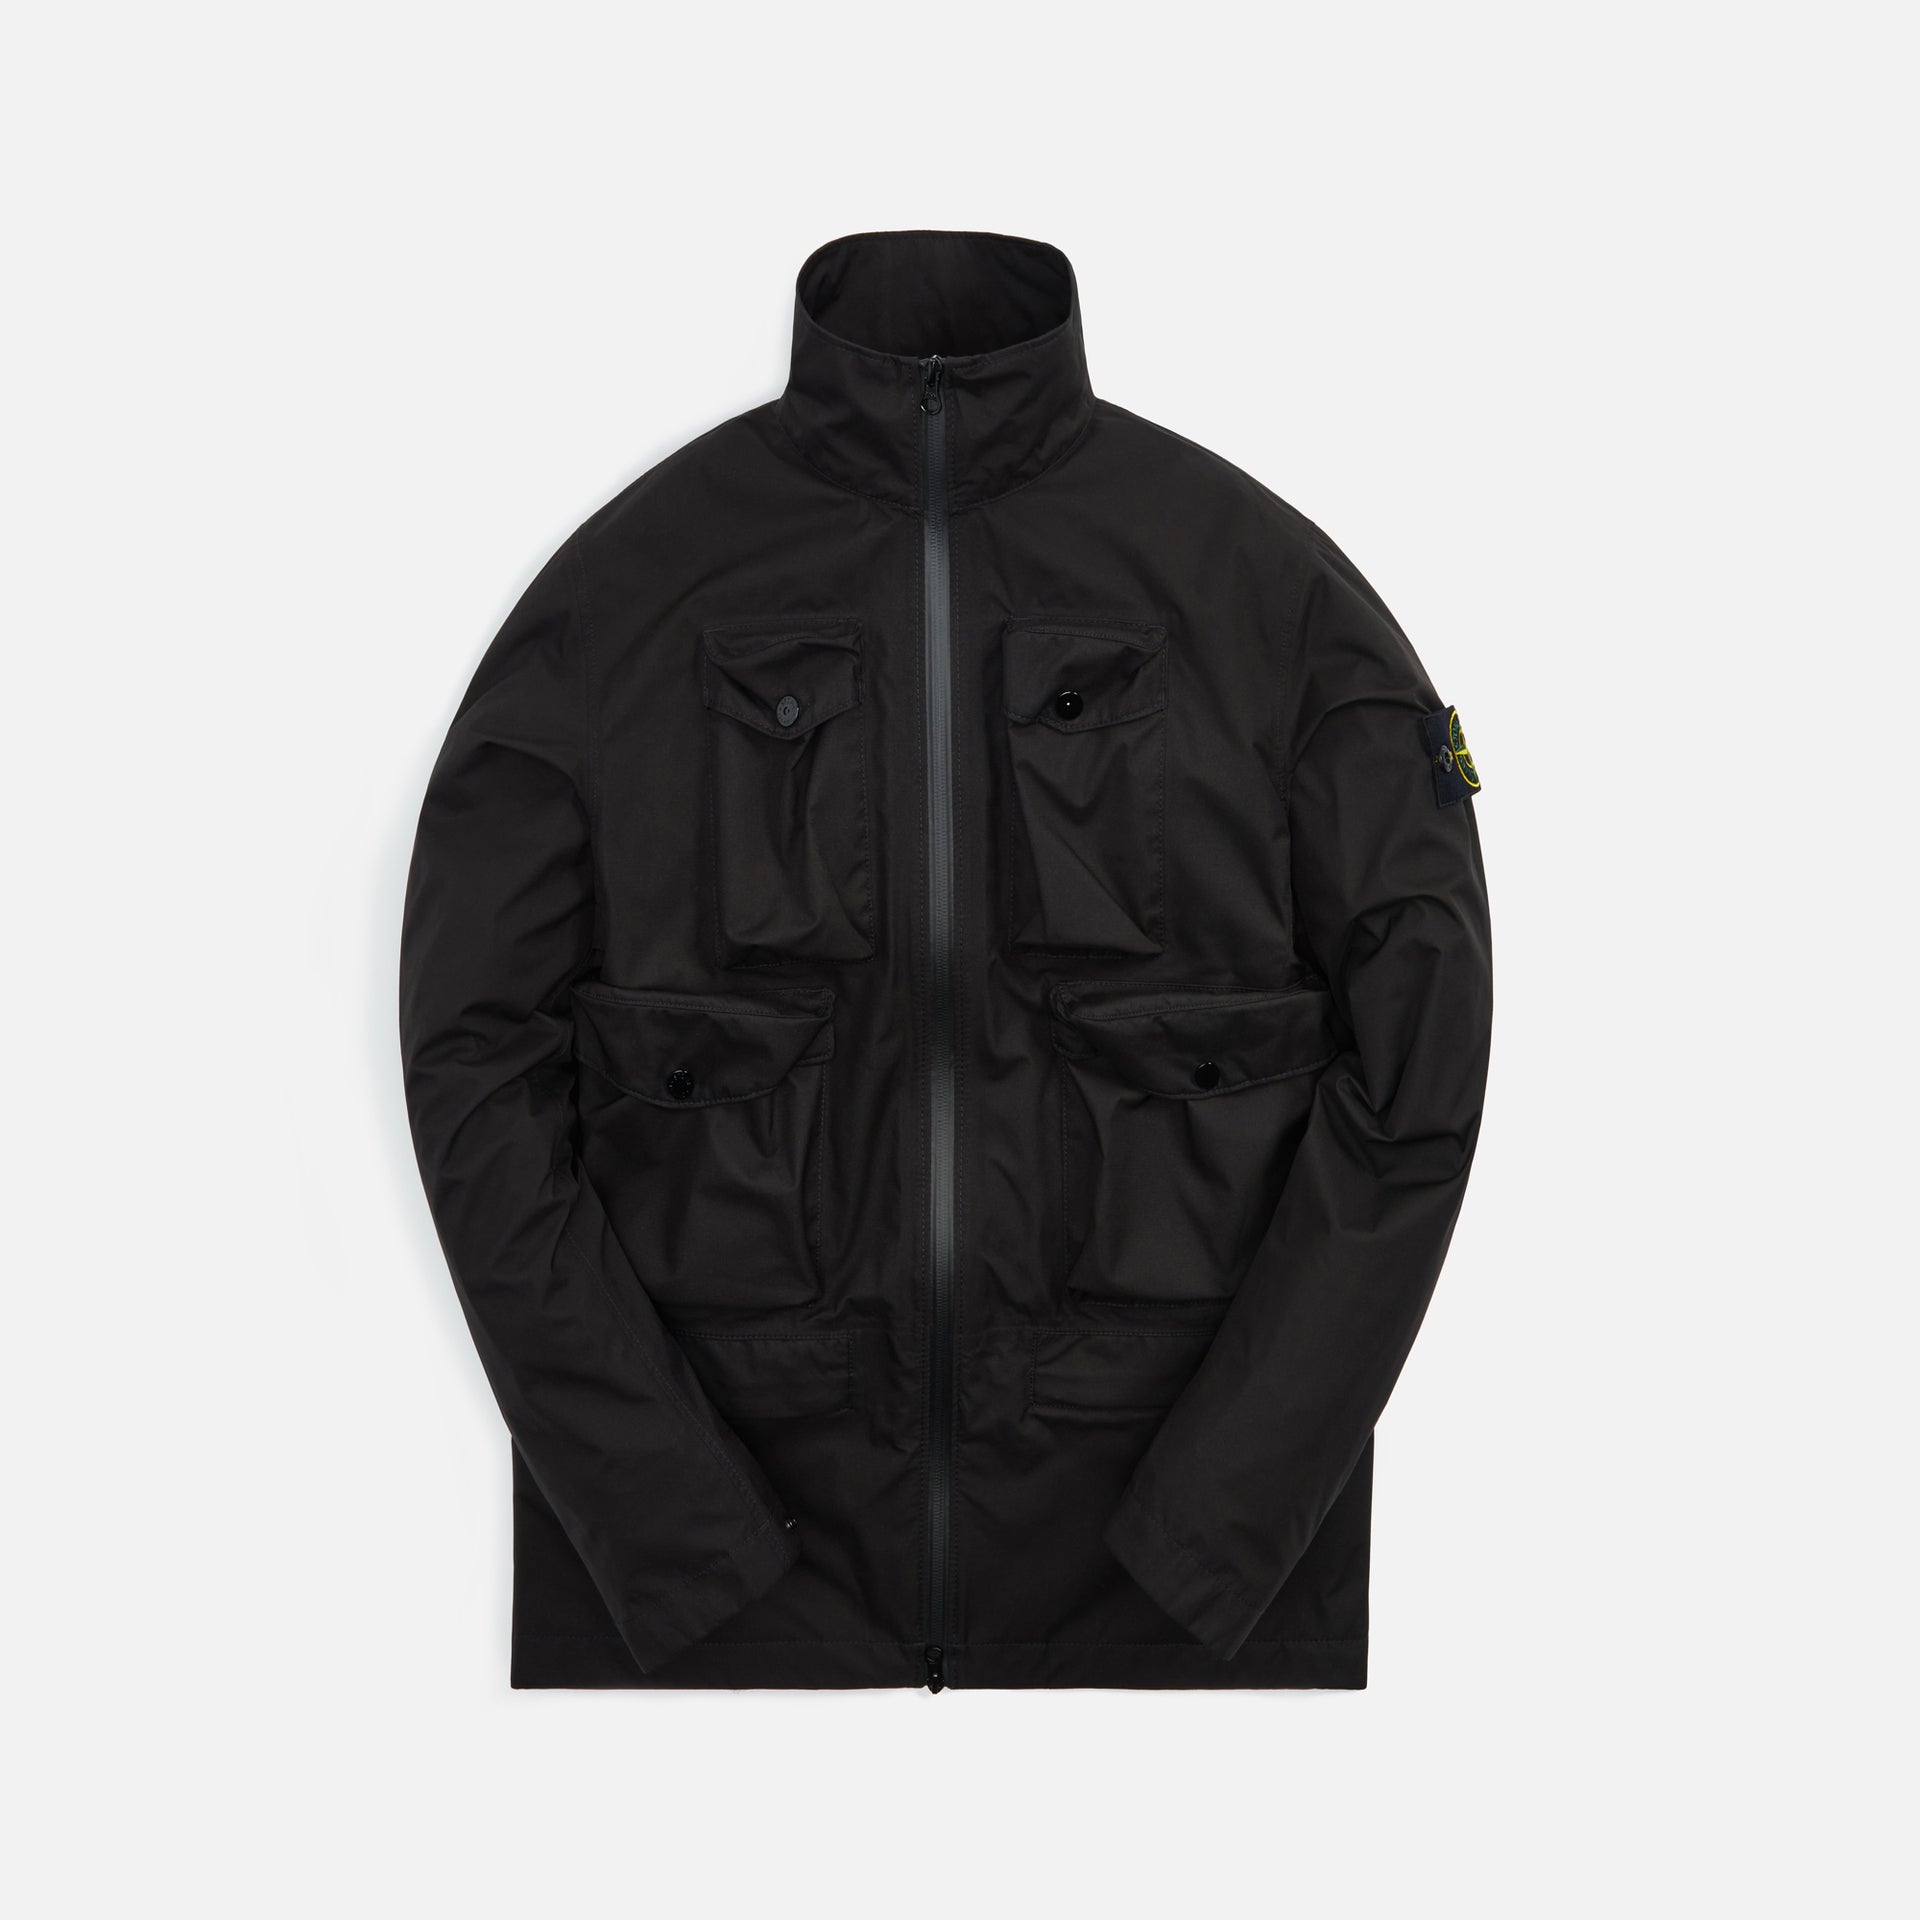 Stone Island Ripstop Gore-Tex Packable Jacket - Black